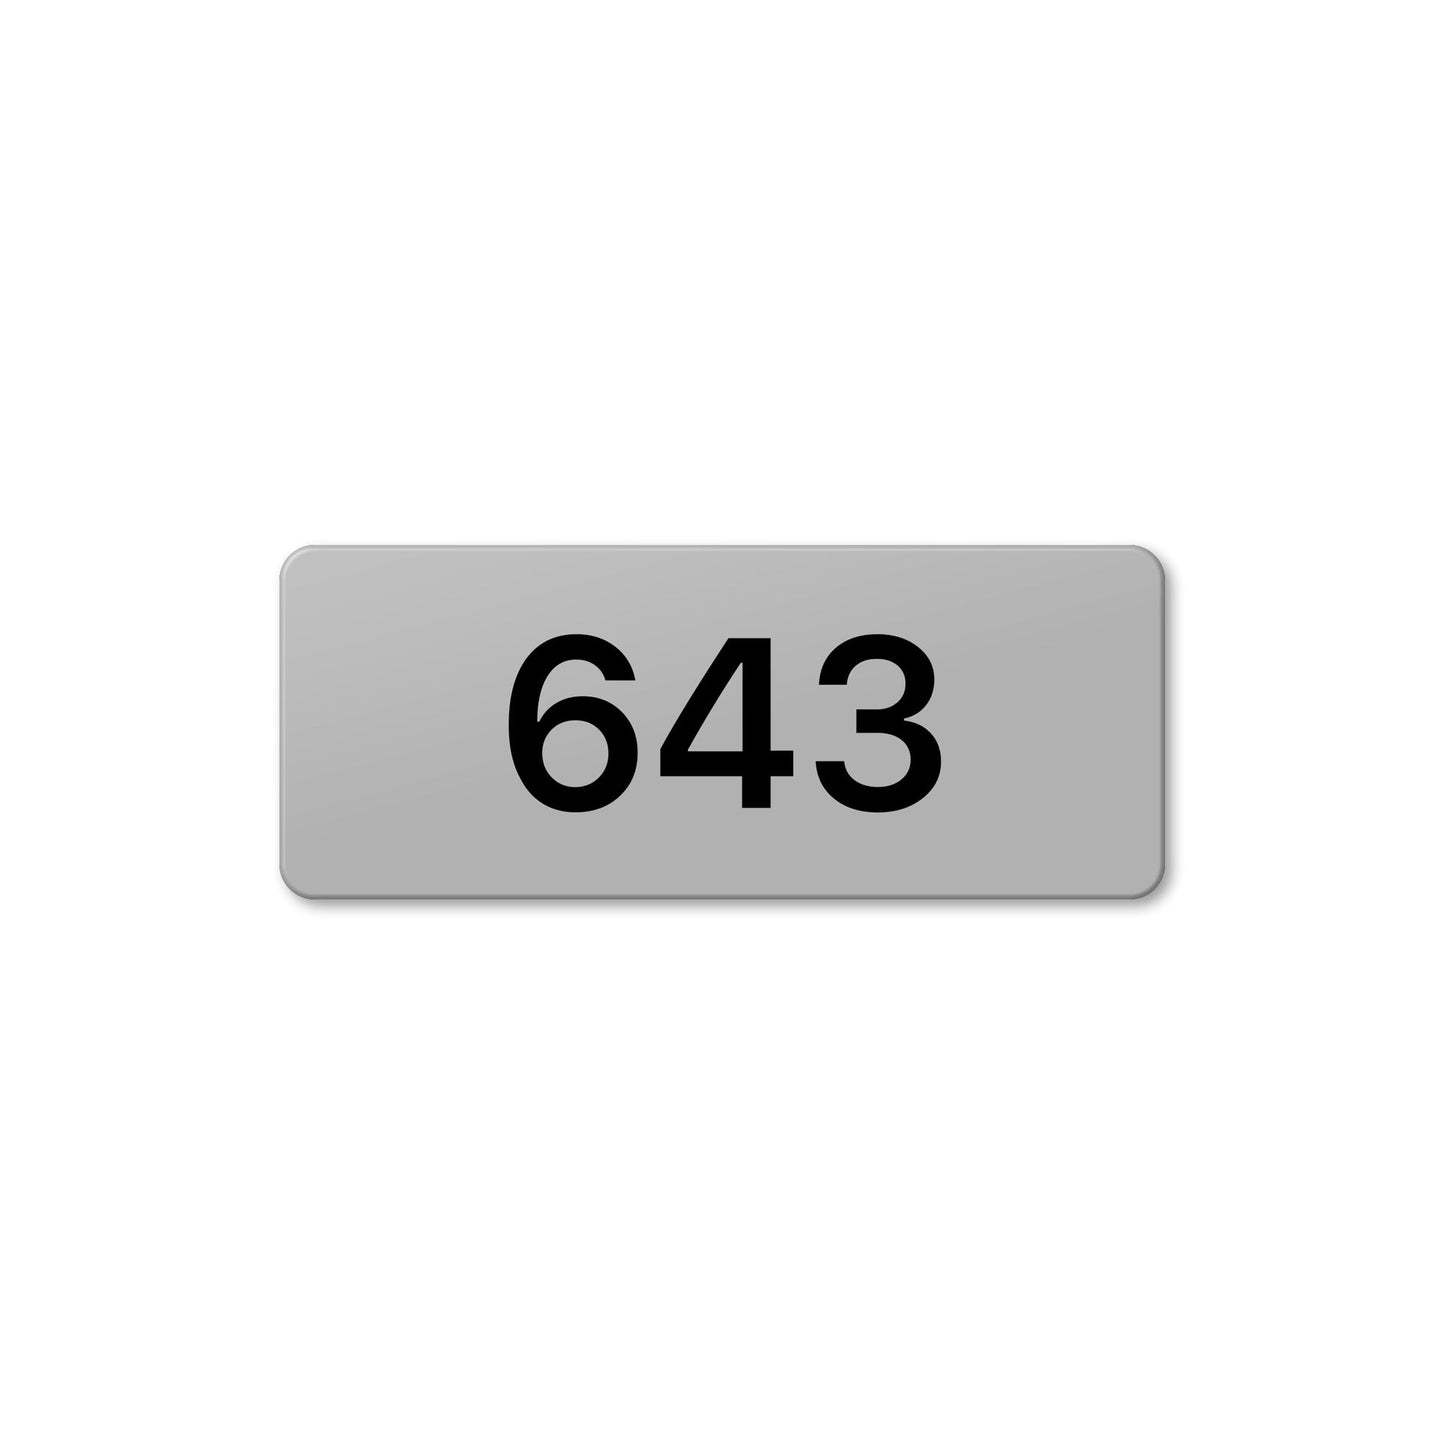 Numeral 643